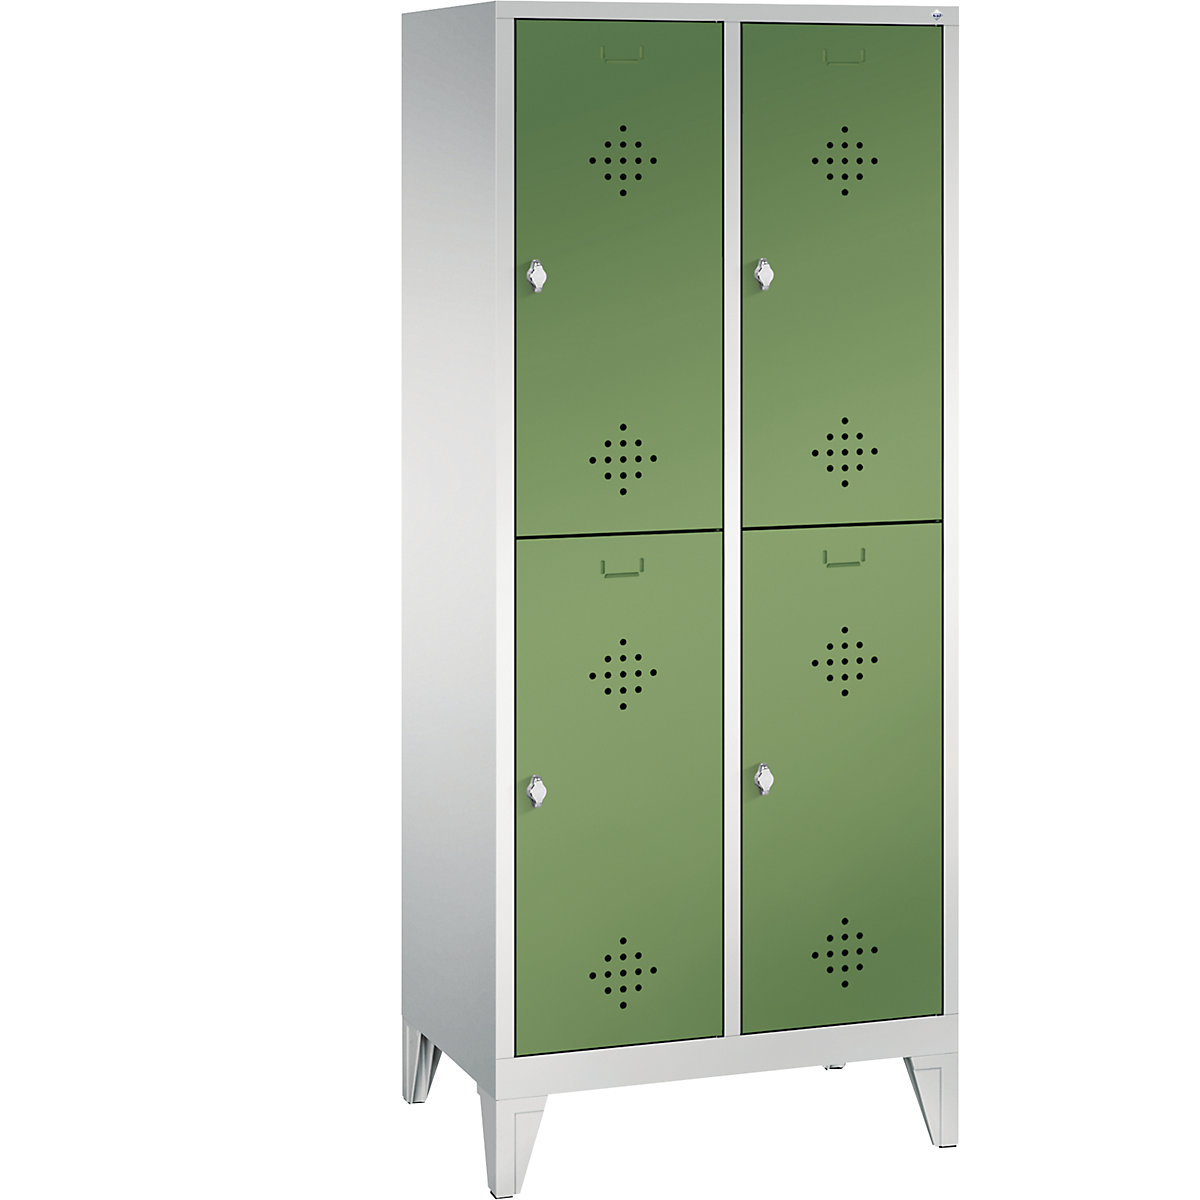 CLASSIC cloakroom locker with feet, double tier – C+P, 2 compartments, 2 shelf compartments each, compartment width 400 mm, light grey / reseda green-6